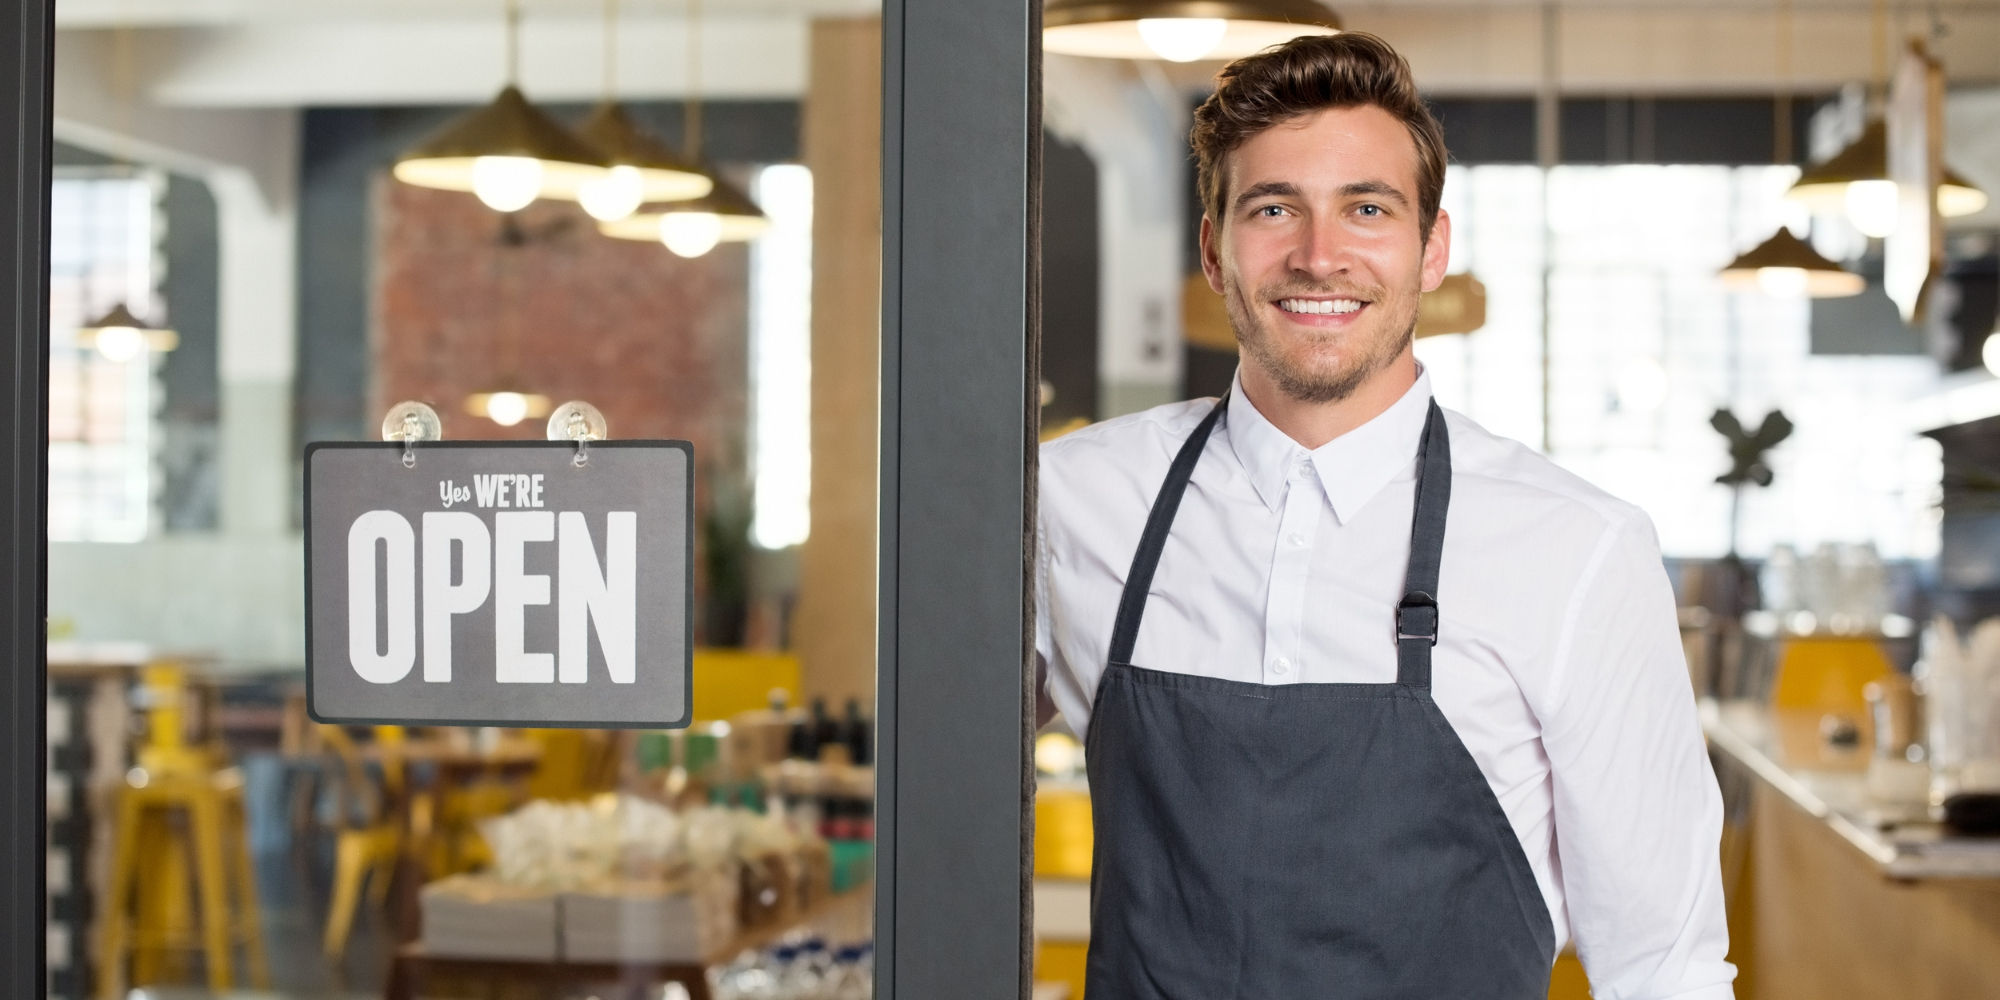 Employee standing next to Open sign on window